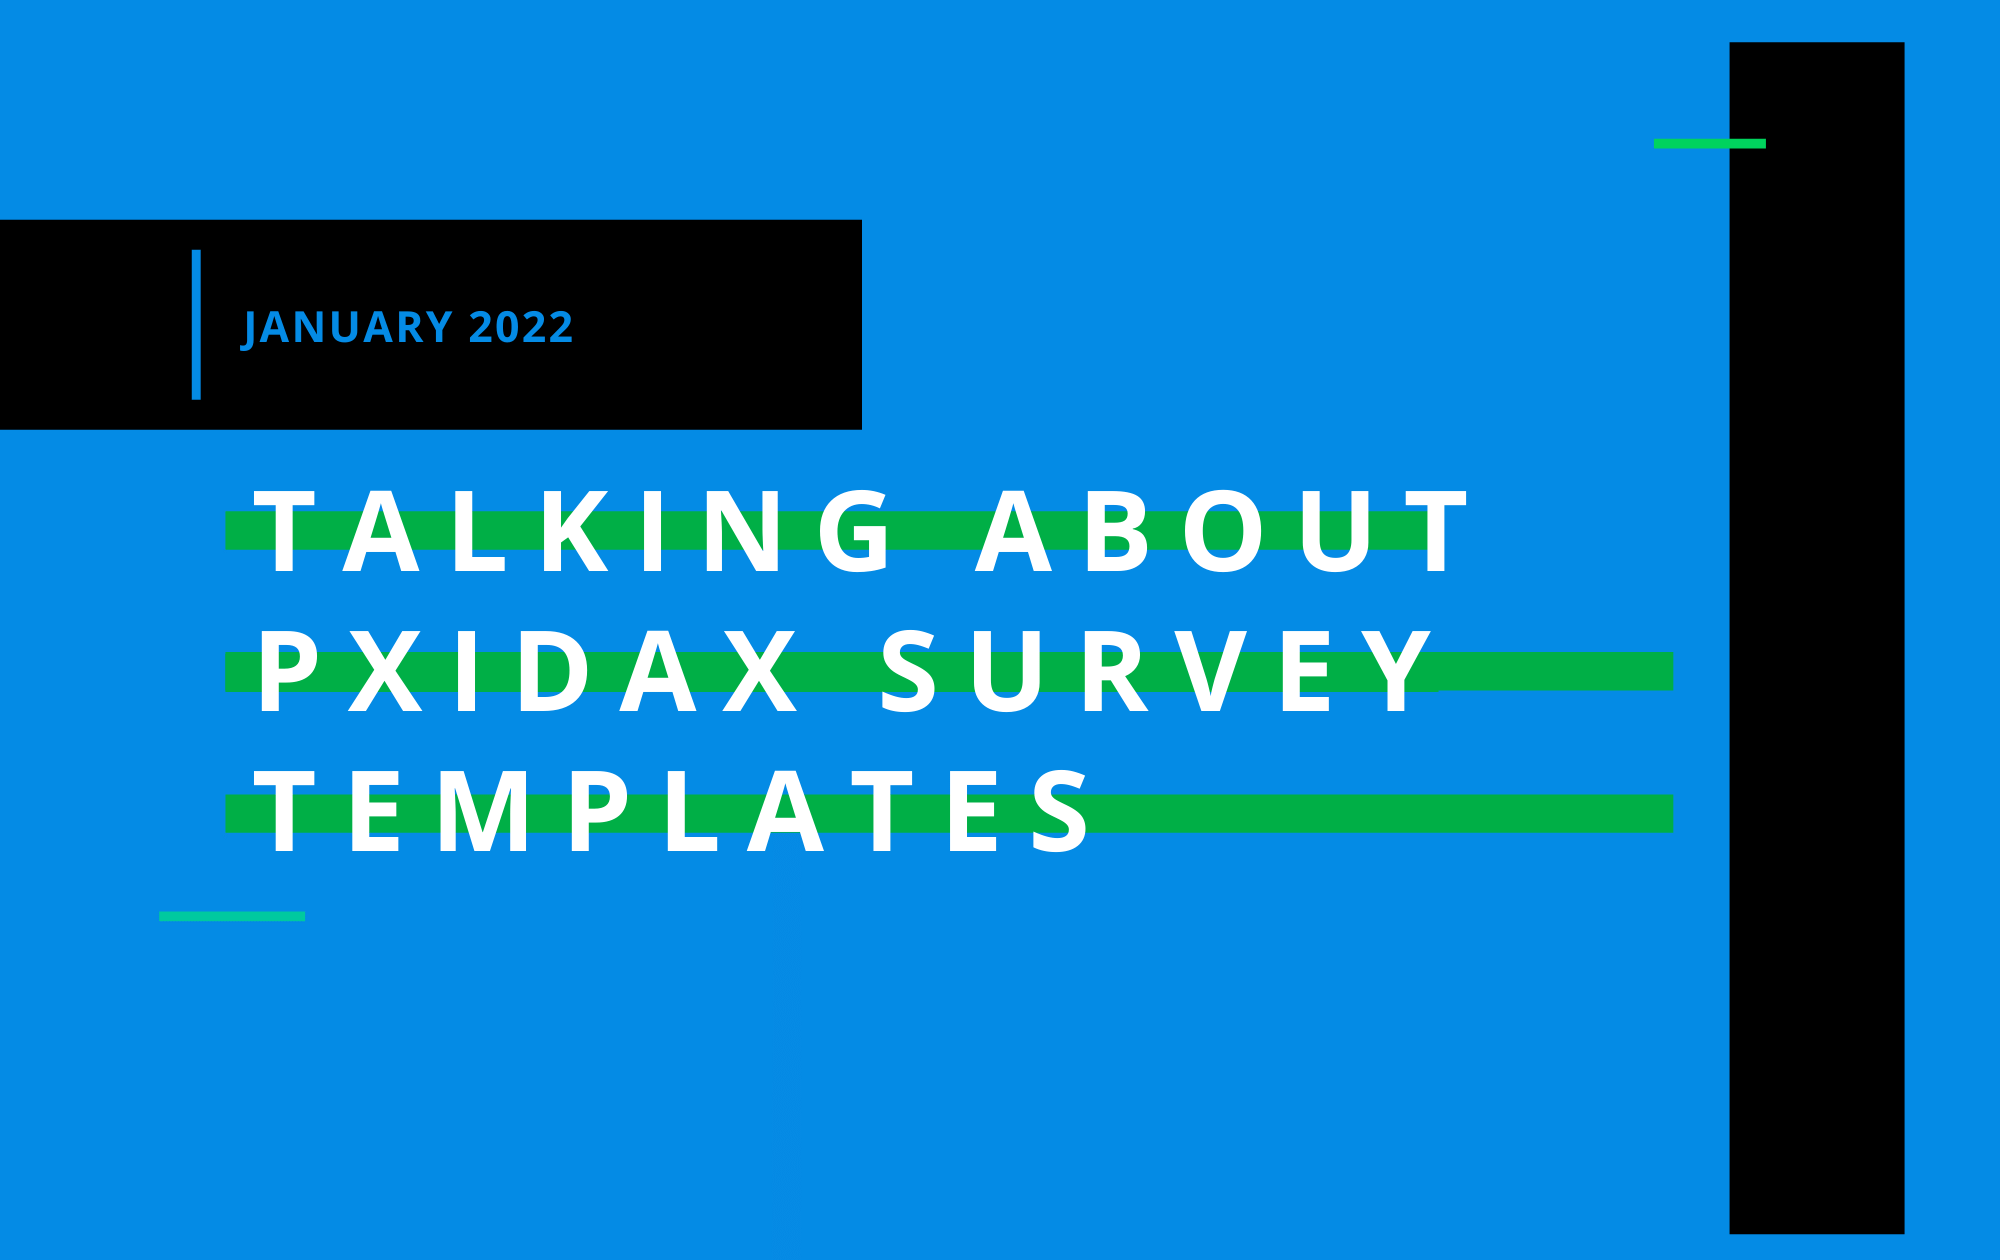 Survey Templates for Improving CX and EX (January 2022)